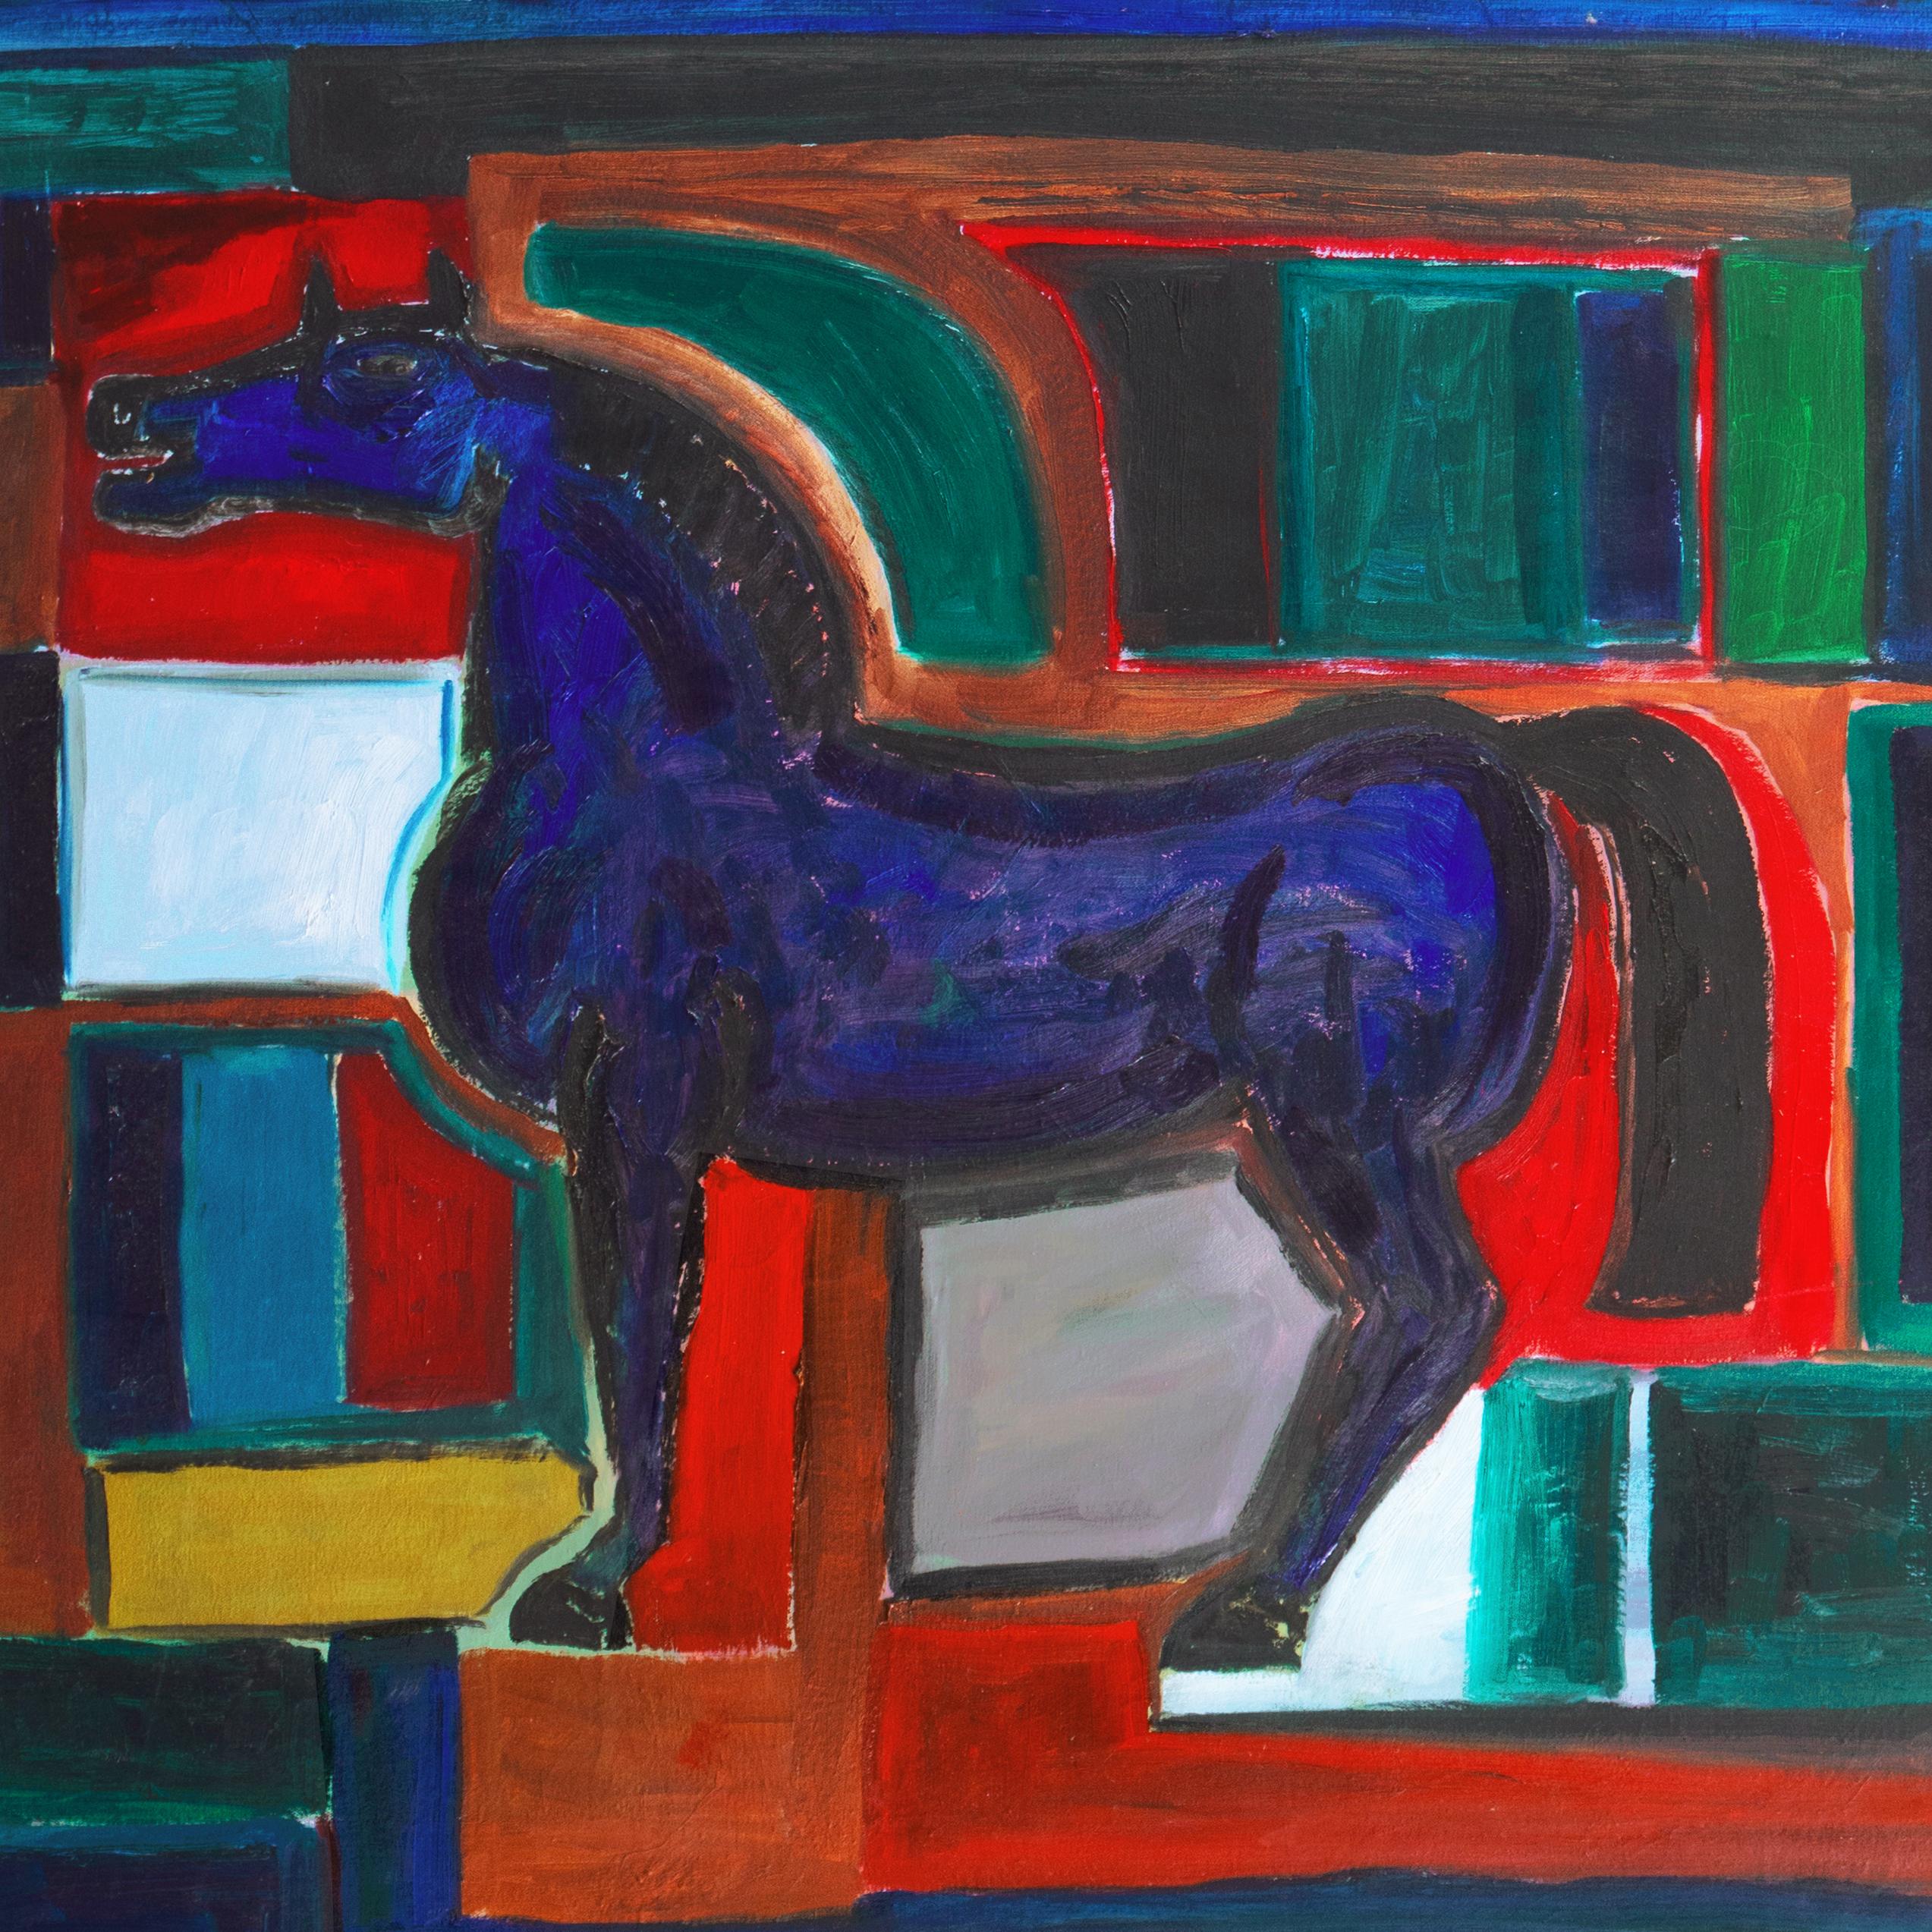 Signed lower right, 'Taylor' for Jonathan Taylor (American, born 1968) and painted circa 2020. Titled, verso, 'Blue Horse', additionally signed and inscribed with artist information. 

This listed California artist first studied art at the College